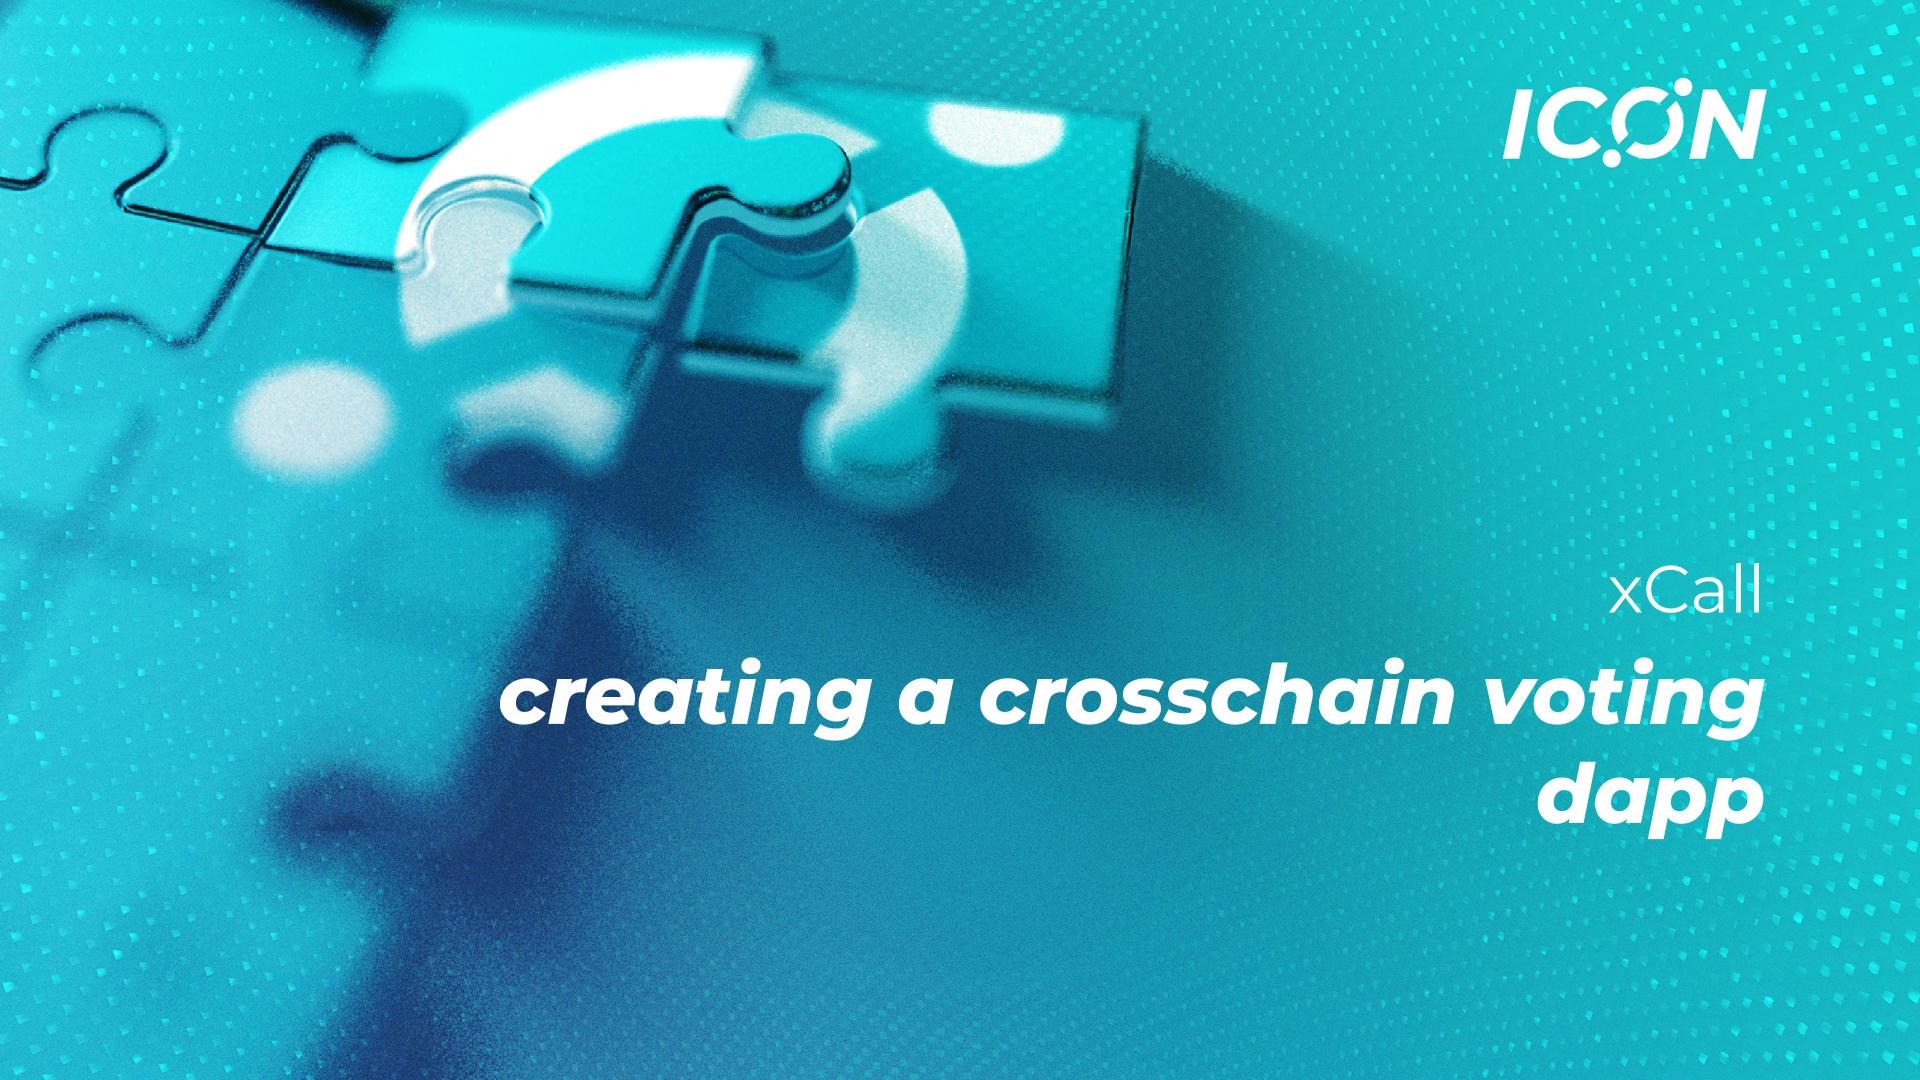 xcall tutorial part 3, integrating rollback into the cross chain voting dApp.